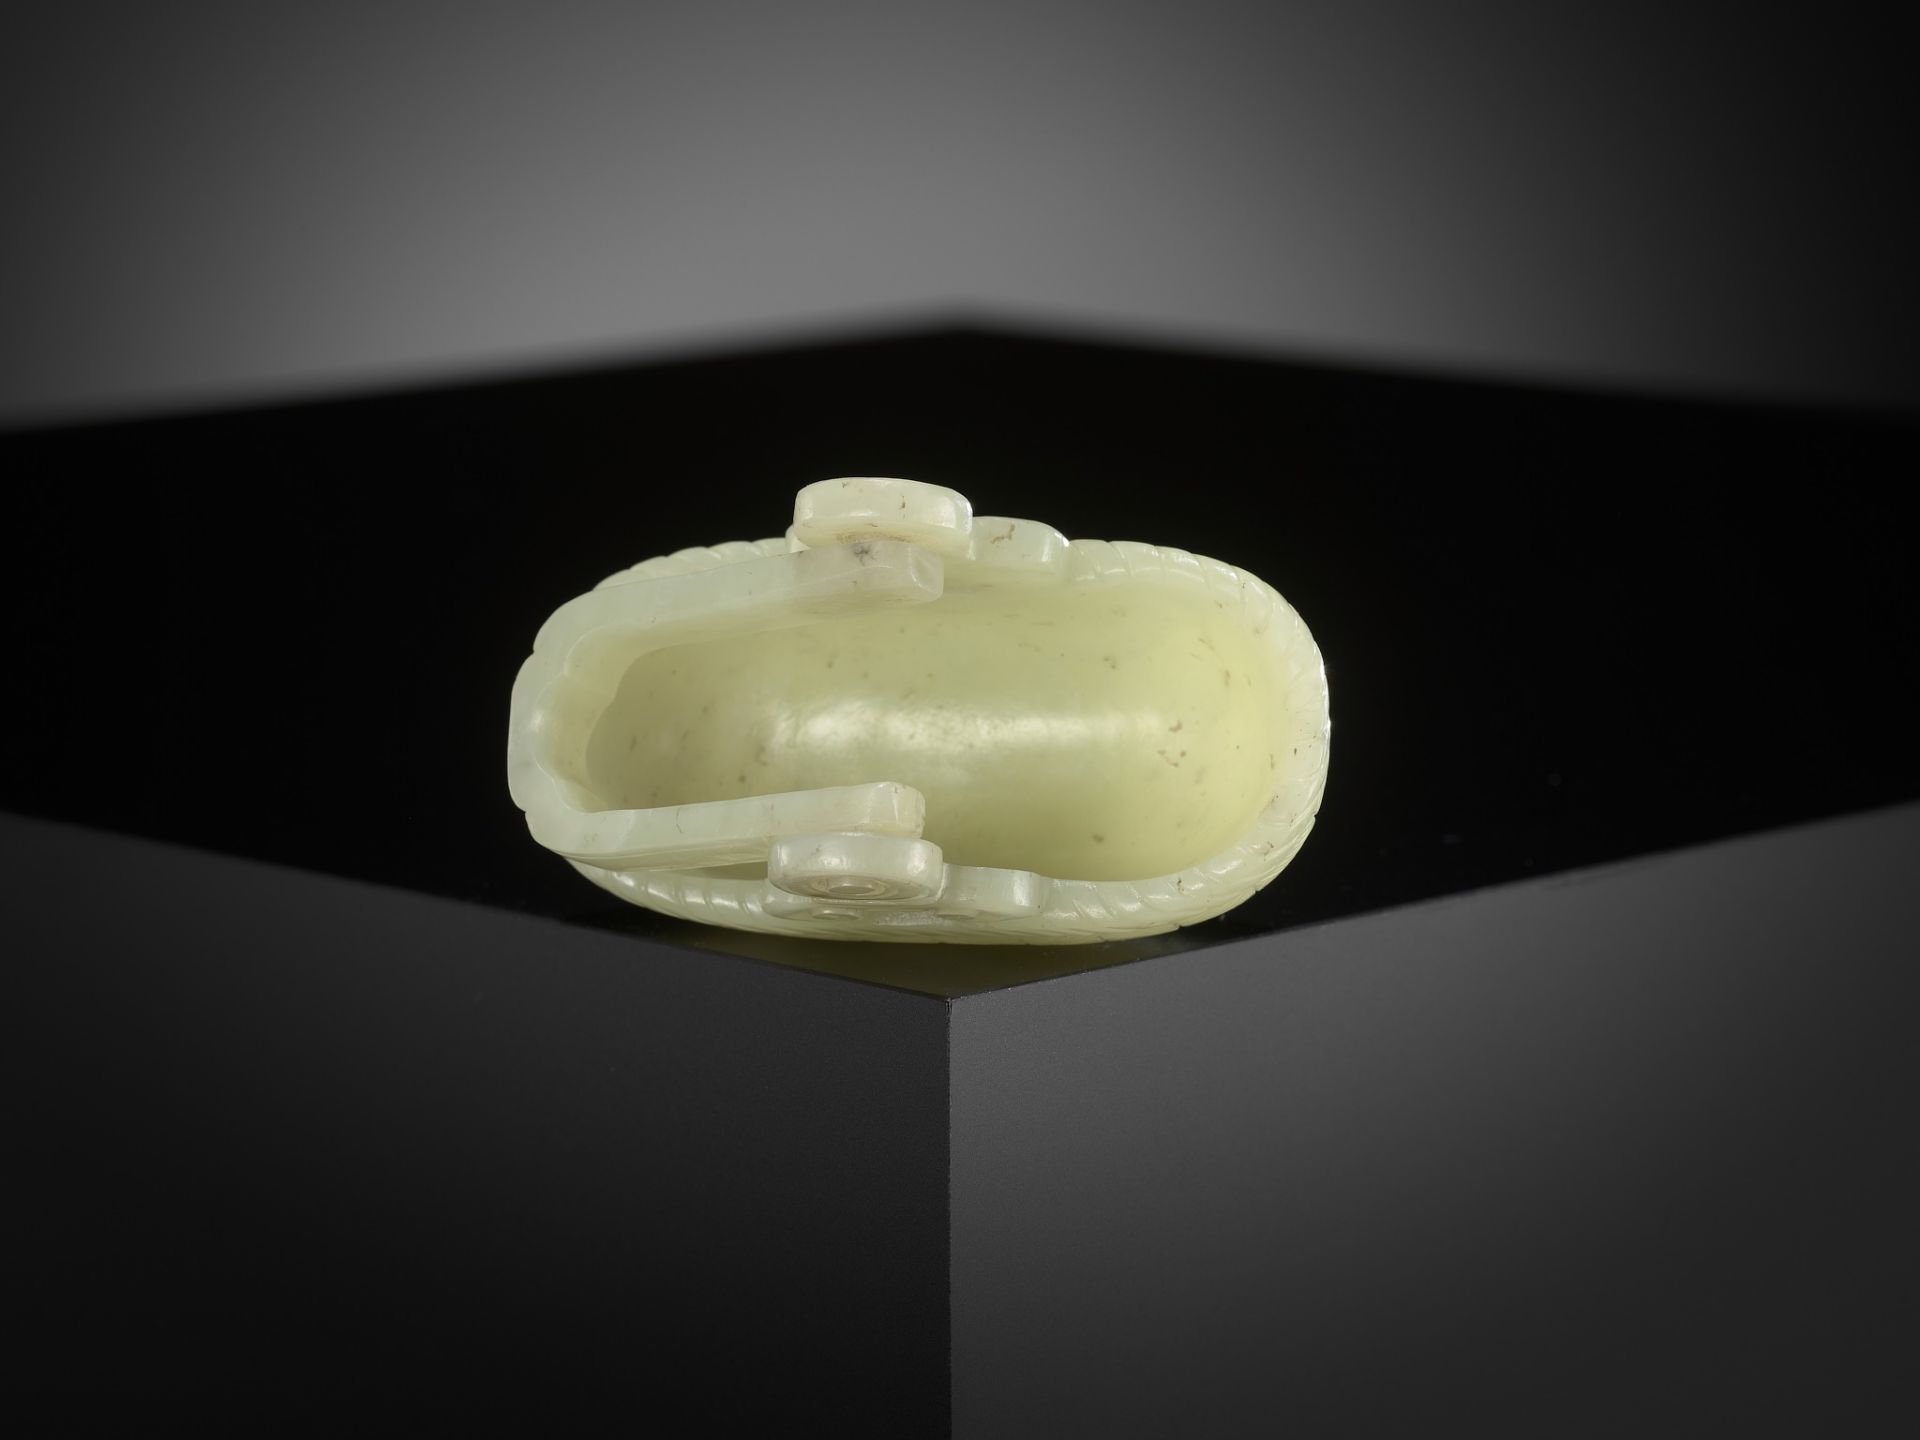 A YELLOW JADE CARVING OF A BASKET WITH MOVABLE HANDLE, CHINA, 18TH CENTURY - Image 7 of 12